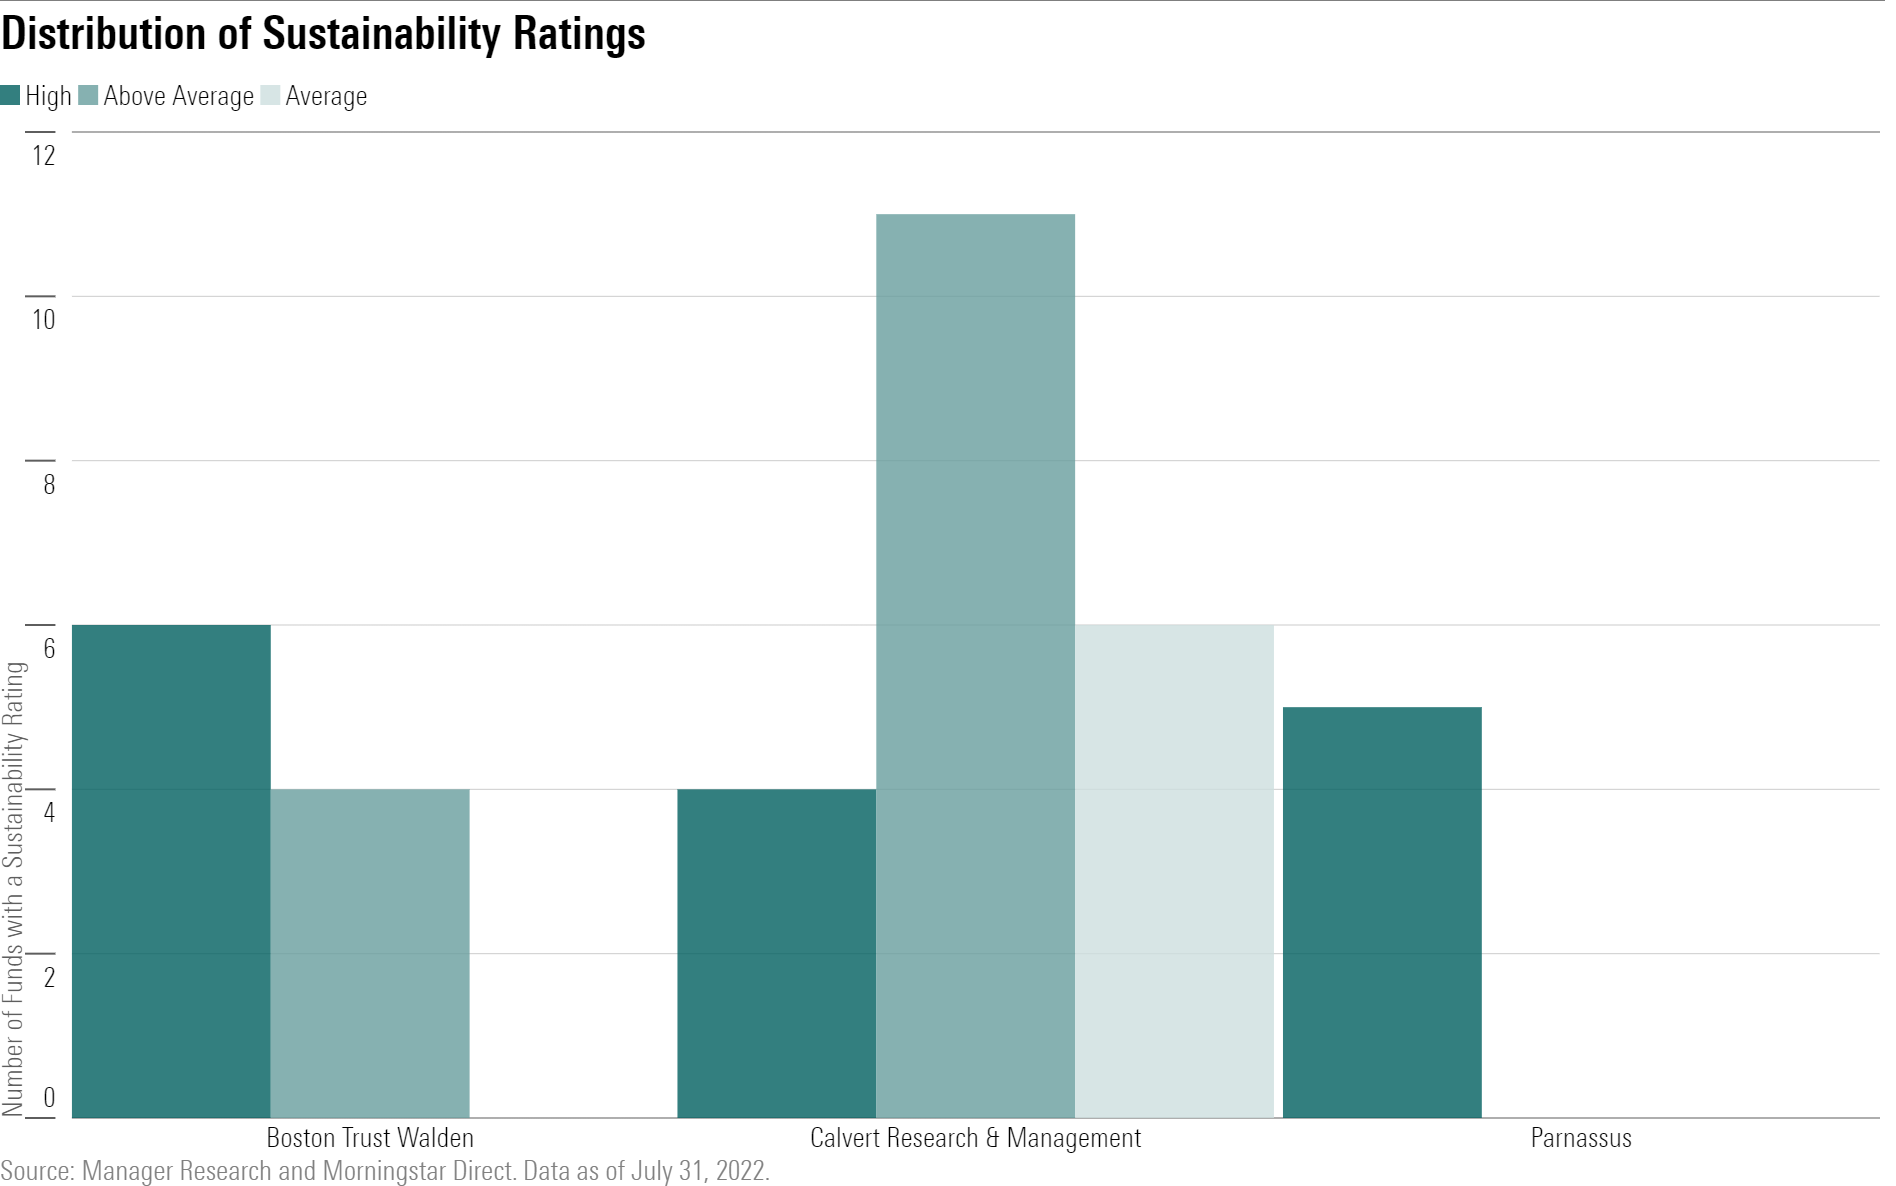 Most funds offered by Leader firms (Boston Trust Walden, Calvert, and Parnassus) have above average or high Morningstar Sustainability Ratings.